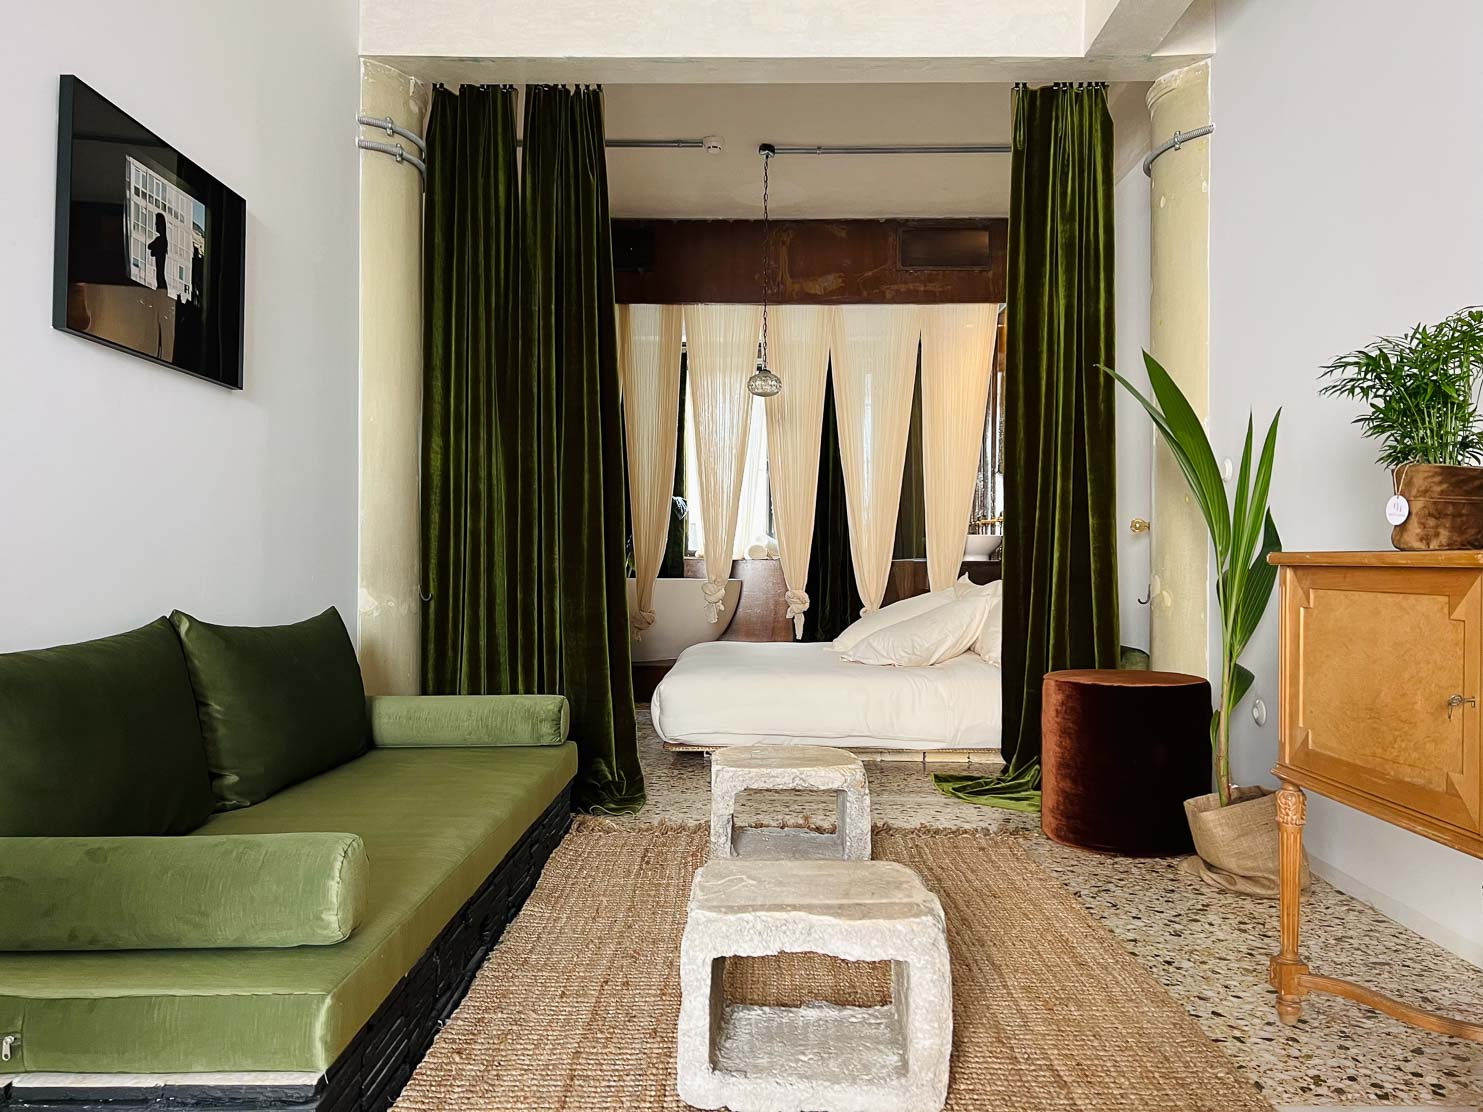 Mona As with sister hotel Shila, all items at Mona are purchasable — from the furniture and organic cotton sheets to the vibrant plants and hand-crafted carpets